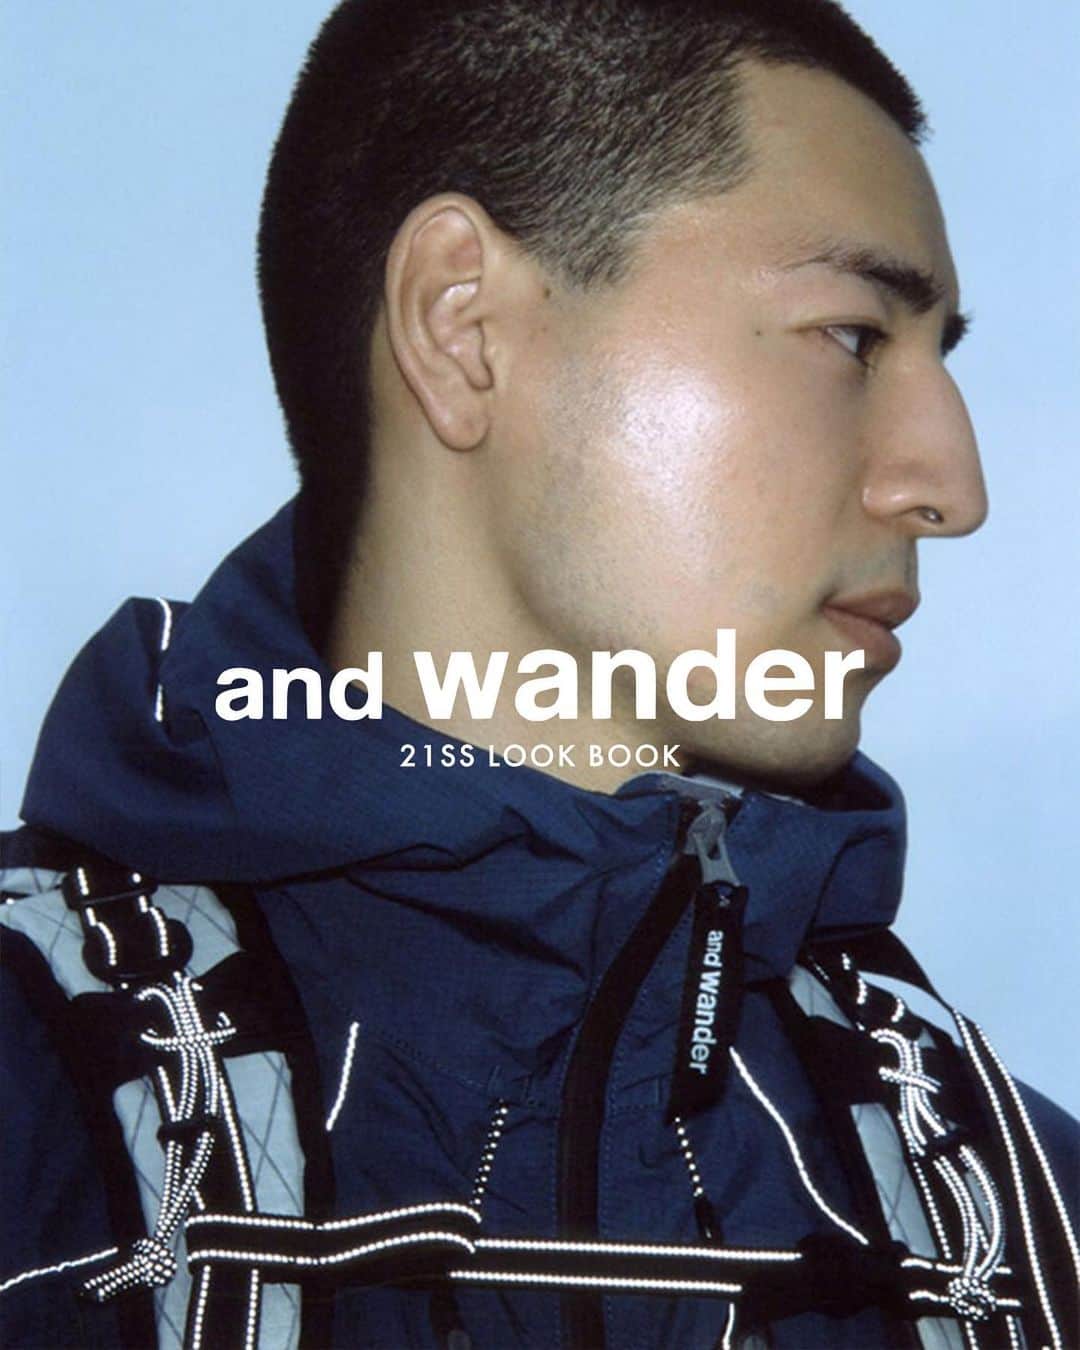 ARKnetsさんのインスタグラム写真 - (ARKnetsInstagram)「《 and wander 》﻿ ﻿ 2021 SPRING & SUMMER  COLLECTION ﻿ ﻿ 《 and wander（アンドワンダー） 》より、2021 SPRING & SUMMERのLOOK BOOKが公開されましたのでご紹介させて頂きます。﻿ ﻿ 2021 SS Look Book：http://bit.ly/3i90Kk1﻿ Look Bookはトップページに記載のオフィシャルサイトからも確認できます。﻿ ﻿ ■BRAND／and wander（アンドワンダー）﻿ 2011春夏からブランドスタート。自然に触れることに魅せられて 山を楽しみ、パリコレクションブランドで培った企画力と山で感じた肌の感覚をもって、アウトドアウェアとギアを提案しています。﻿ ﻿ and wander was launched in spring/summer of 2011.﻿ Charmed by nature and enjoying the thrill of the mountains, we combined project design ability refined with the Paris Collection brands and the sensation of the mountain atmosphere to create our own outdoor wear and gear.﻿ ﻿ ﻿ ﻿ 【 取り扱い店舗 】﻿ @pier_lounge_by_ark﻿ @reark_arknets﻿ ﻿ ﻿ ■商品や通信販売に関しまして、ご不明な点がございましたらお気軽にお問い合わせください。﻿ -----------------------------------﻿ 【お問い合わせ】﻿ ARKnetsコールセンター﻿ TEL：028-634-1212 ( 営業時間 12:00～19:00 )﻿ ※店舗へ繋がりにくい場合には、こちらまでお問合せ下さい。﻿ -------------------------------------﻿ #andwander #アンドワンダー #arknets #reark #pierloungebyark #栃木 #宇都宮 #群馬 #高崎 #埼玉 #越谷 #セレクトショップ #styling #スタイリング #fashion #ファッション #コーデ #coodinate #コーディネイト #21ss #2021ss #lookbook #21sslook #2021sscollection #andwander21ss #outfit #recommenditem #オススメ #春夏 #SEASONLOOK」1月13日 15時28分 - arknets_official